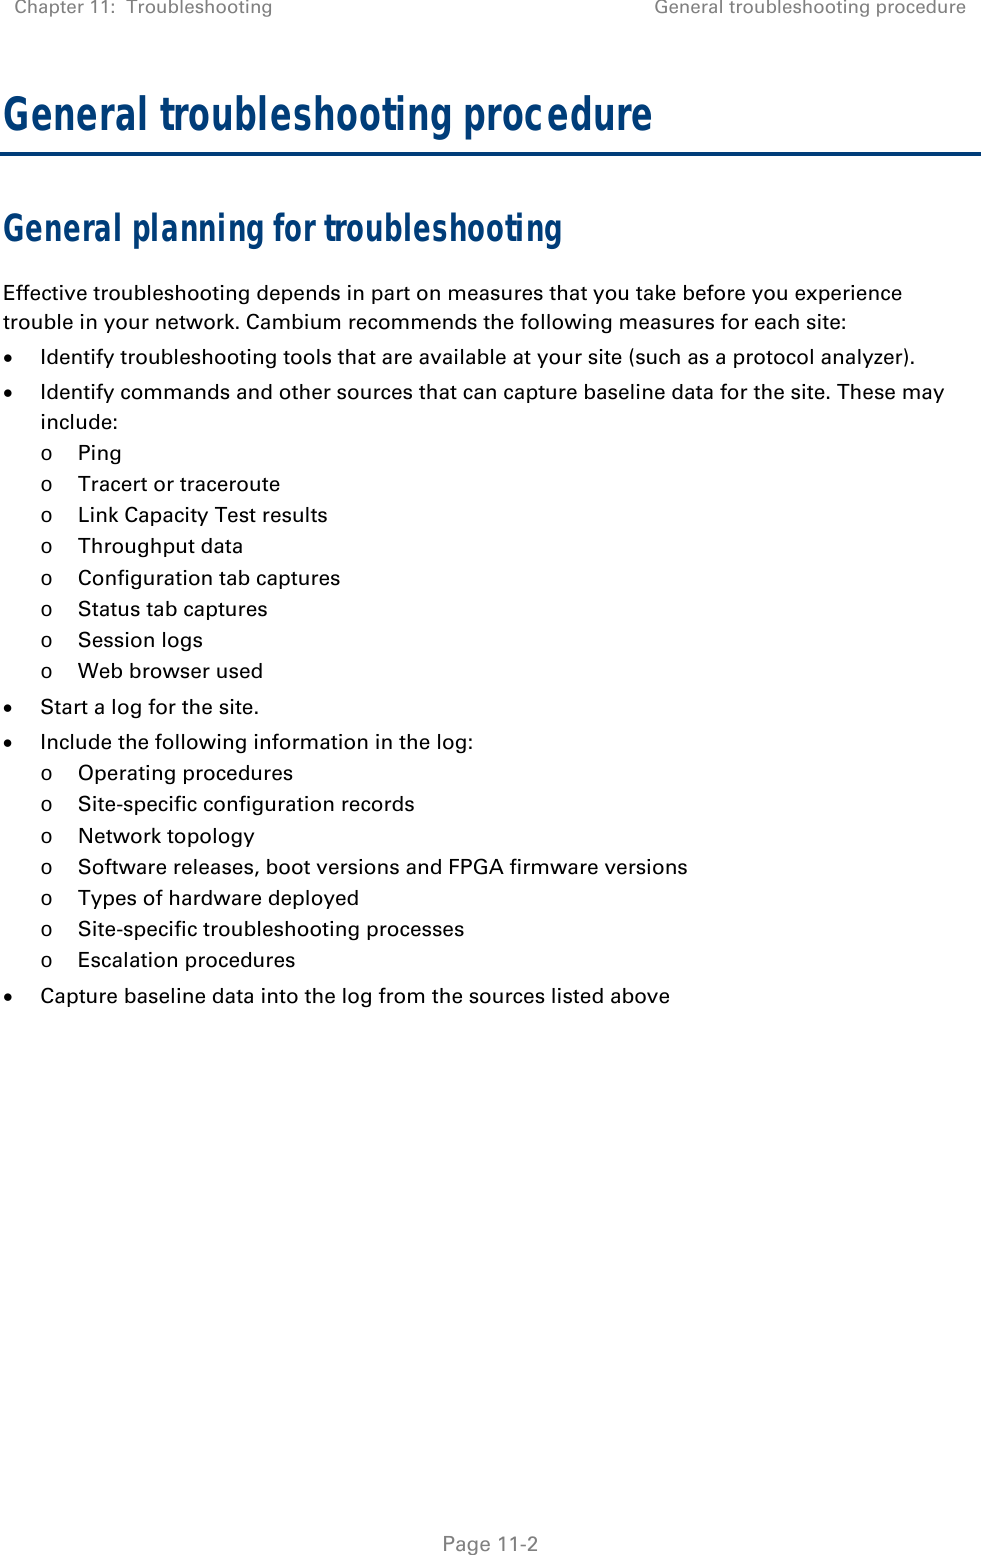 Chapter 11:  Troubleshooting  General troubleshooting procedure   Page 11-2 General troubleshooting procedure General planning for troubleshooting Effective troubleshooting depends in part on measures that you take before you experience trouble in your network. Cambium recommends the following measures for each site:  Identify troubleshooting tools that are available at your site (such as a protocol analyzer).  Identify commands and other sources that can capture baseline data for the site. These may include: o Ping o Tracert or traceroute o Link Capacity Test results o Throughput data o Configuration tab captures o Status tab captures o Session logs o Web browser used  Start a log for the site.  Include the following information in the log: o Operating procedures o Site-specific configuration records o Network topology o Software releases, boot versions and FPGA firmware versions o Types of hardware deployed o Site-specific troubleshooting processes o Escalation procedures  Capture baseline data into the log from the sources listed above   